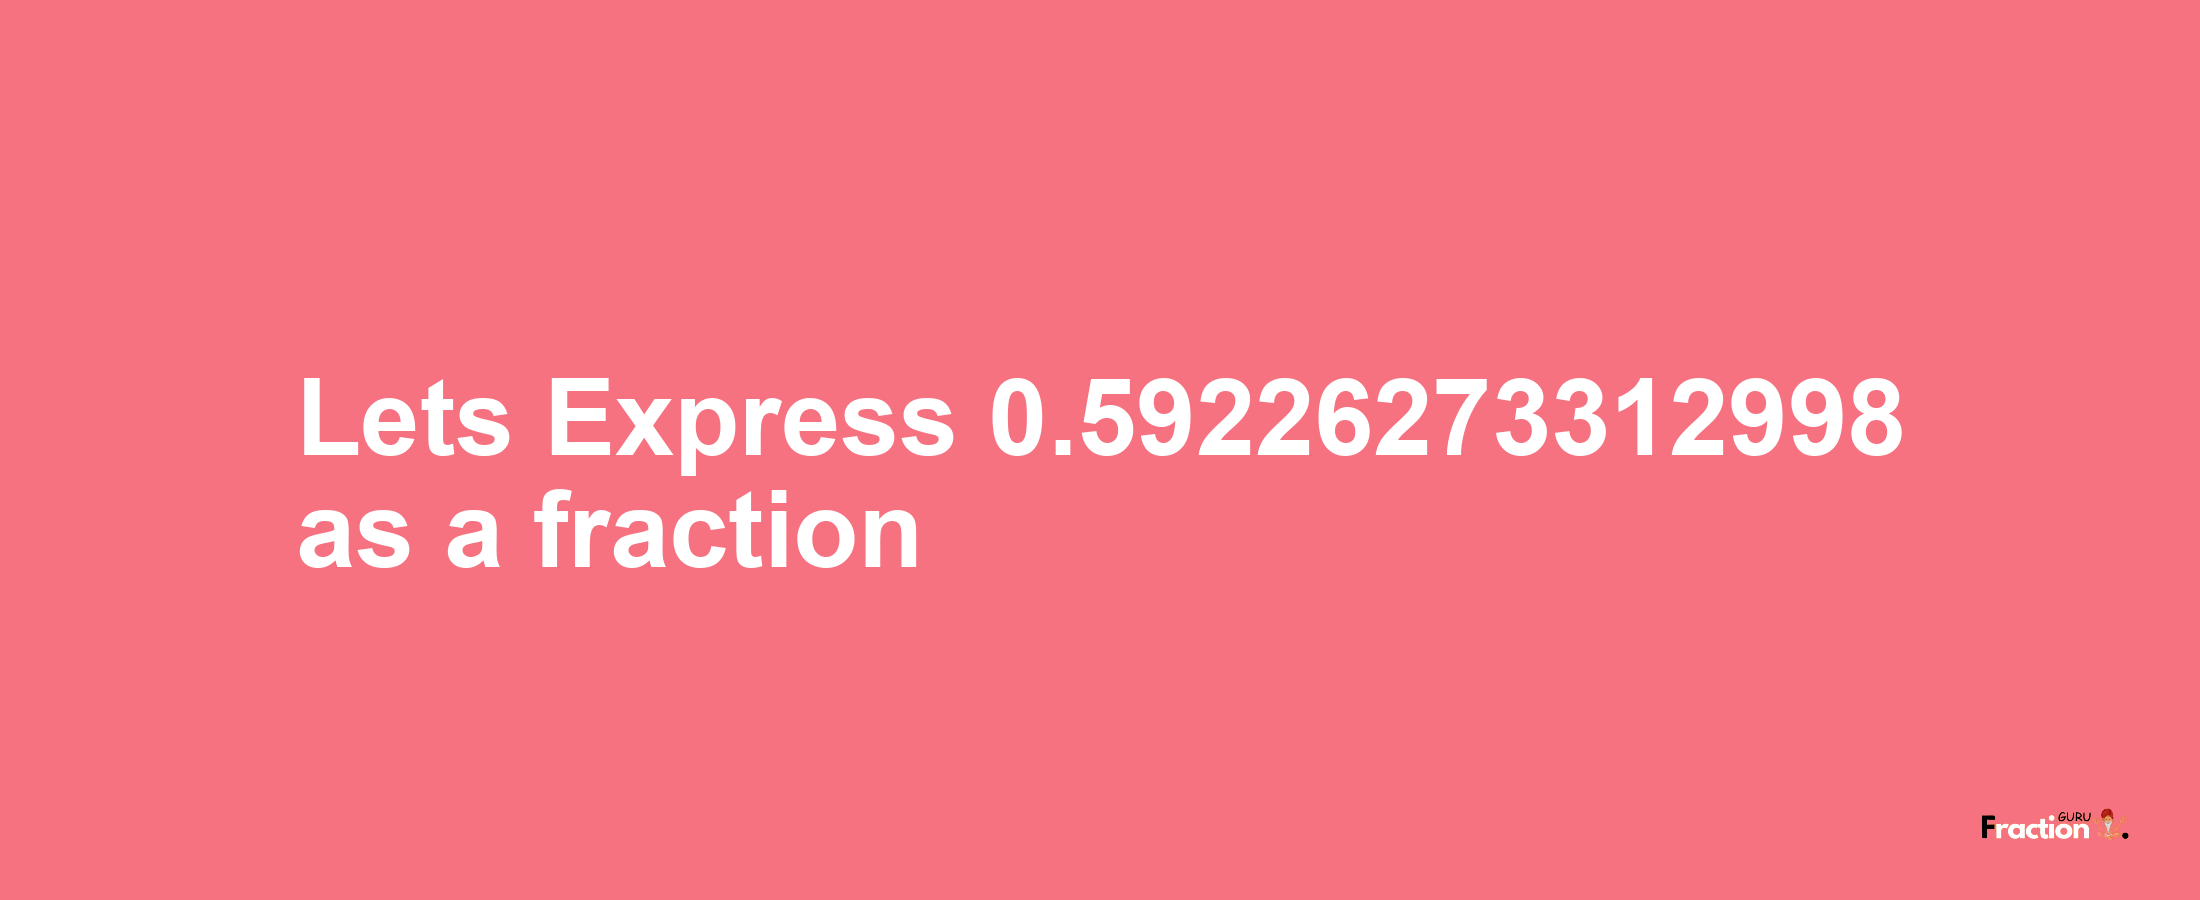 Lets Express 0.59226273312998 as afraction